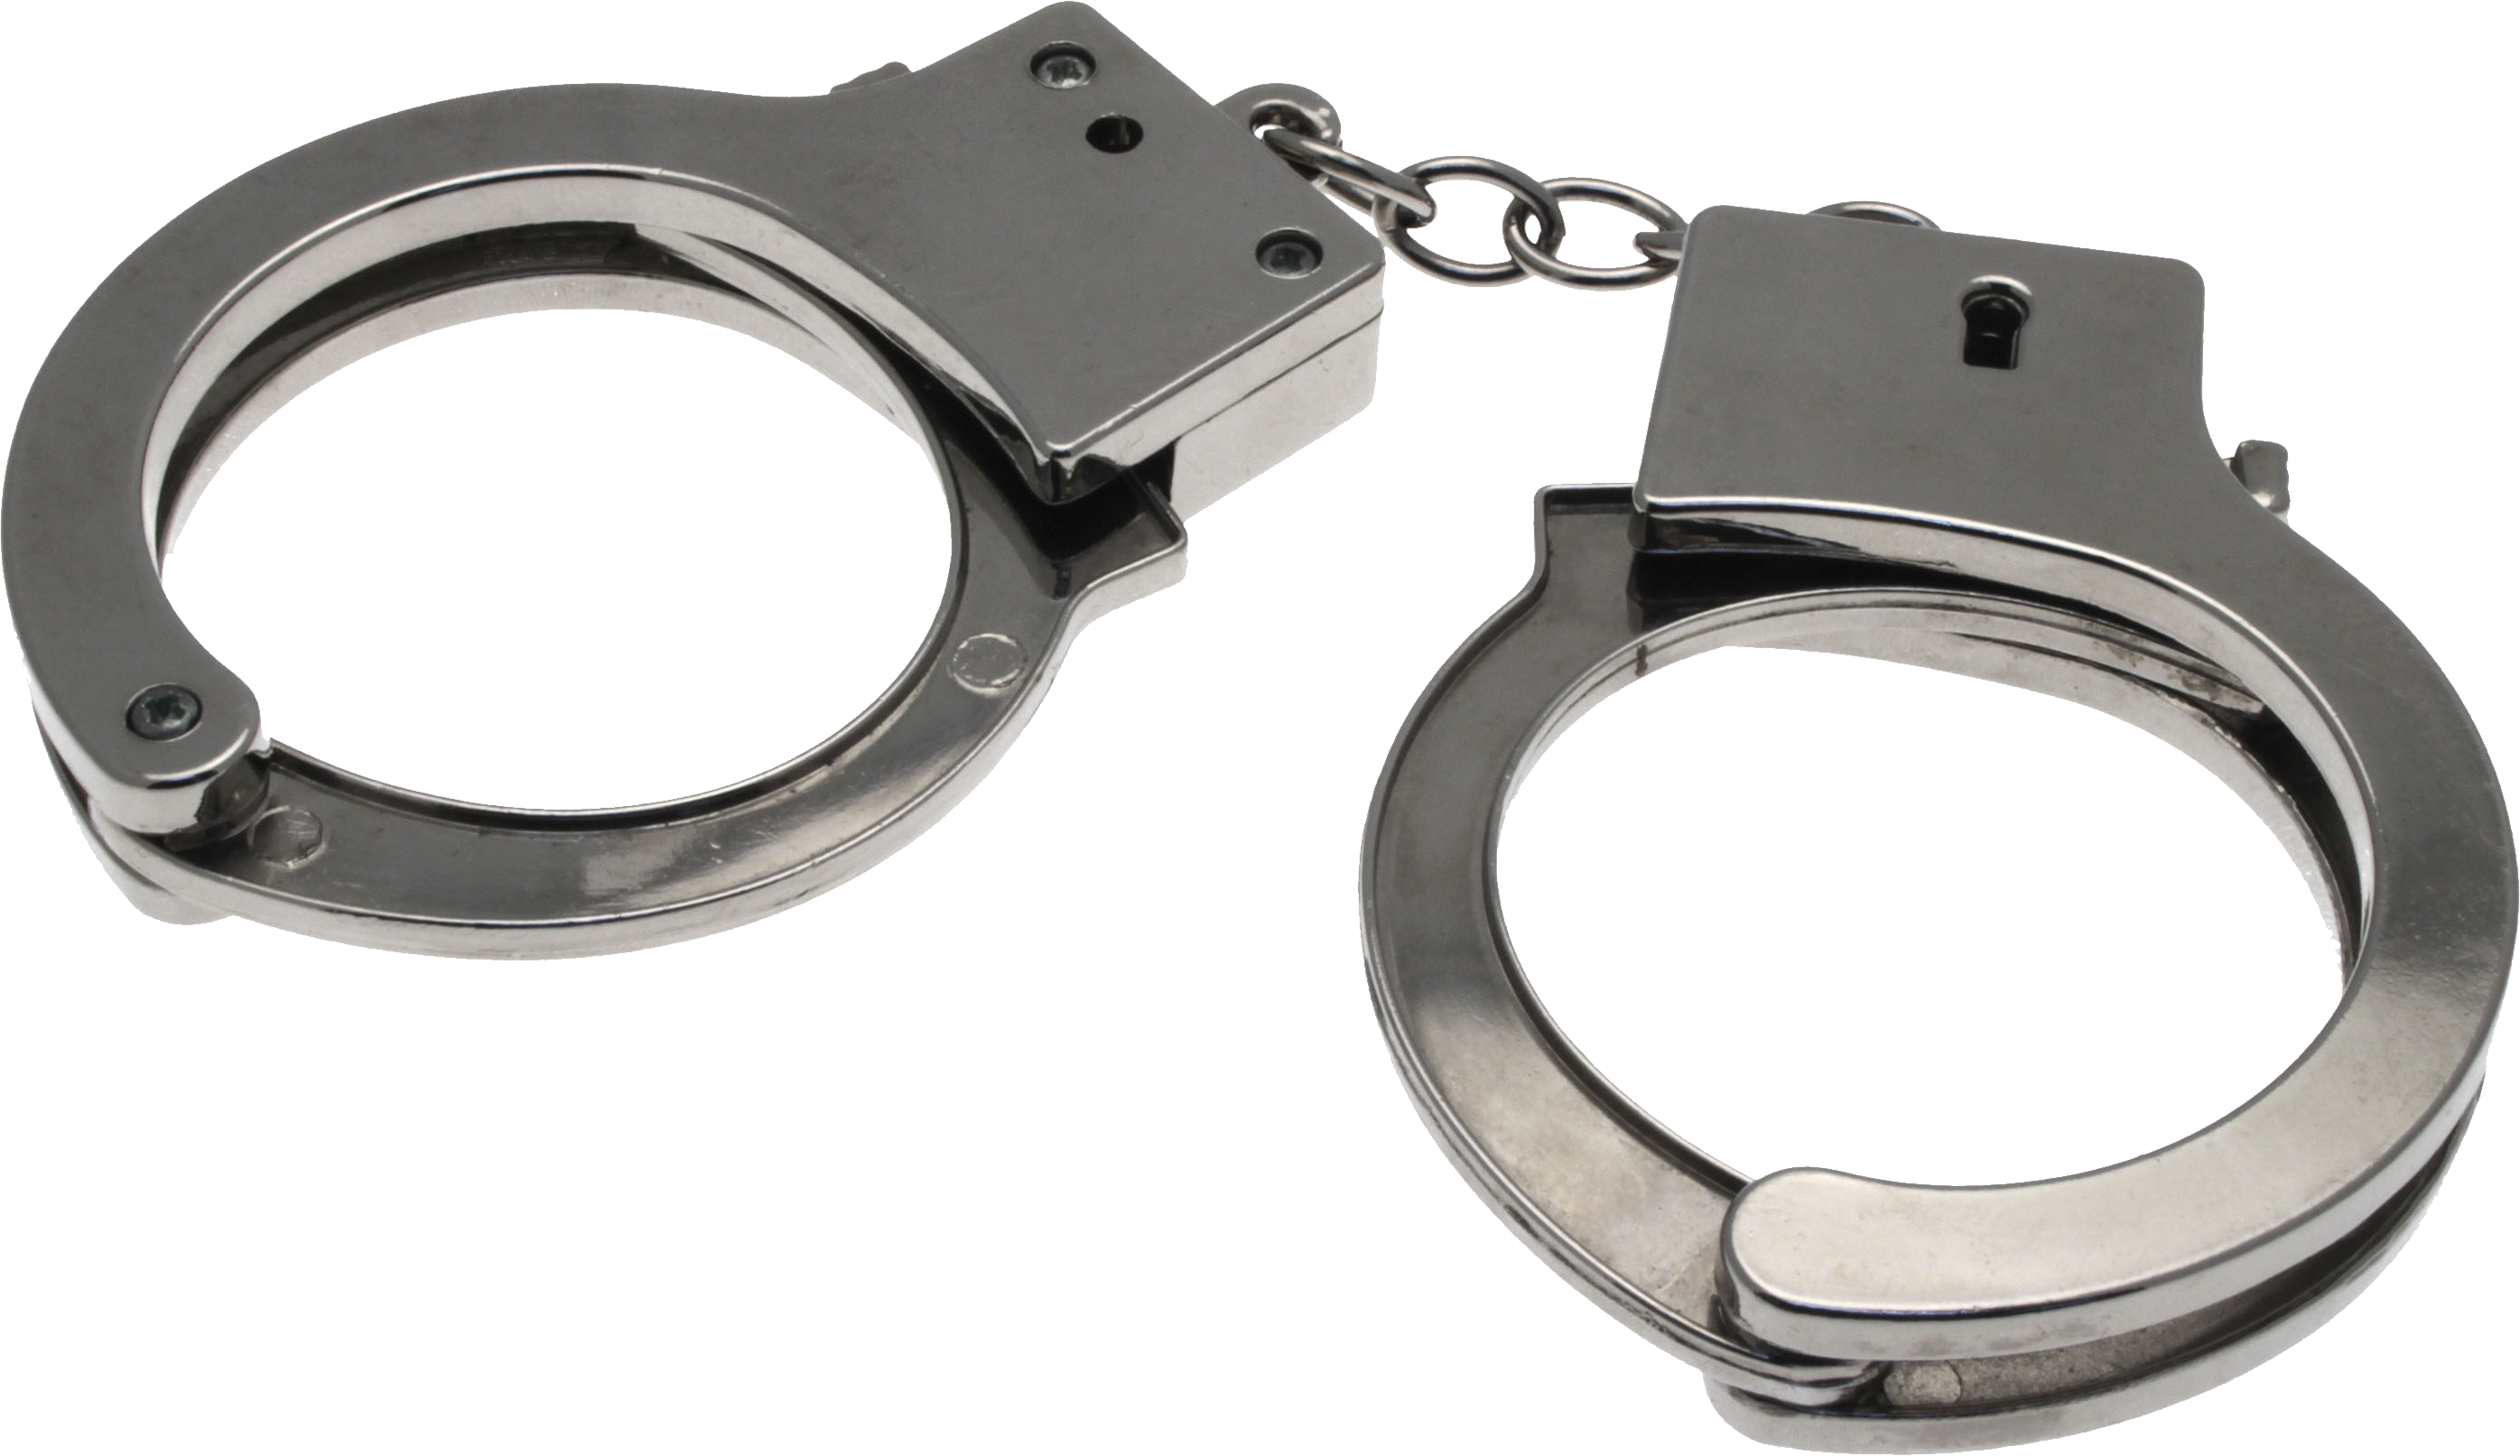 Handcuff clipart transparent background. Handcuffs png image purepng